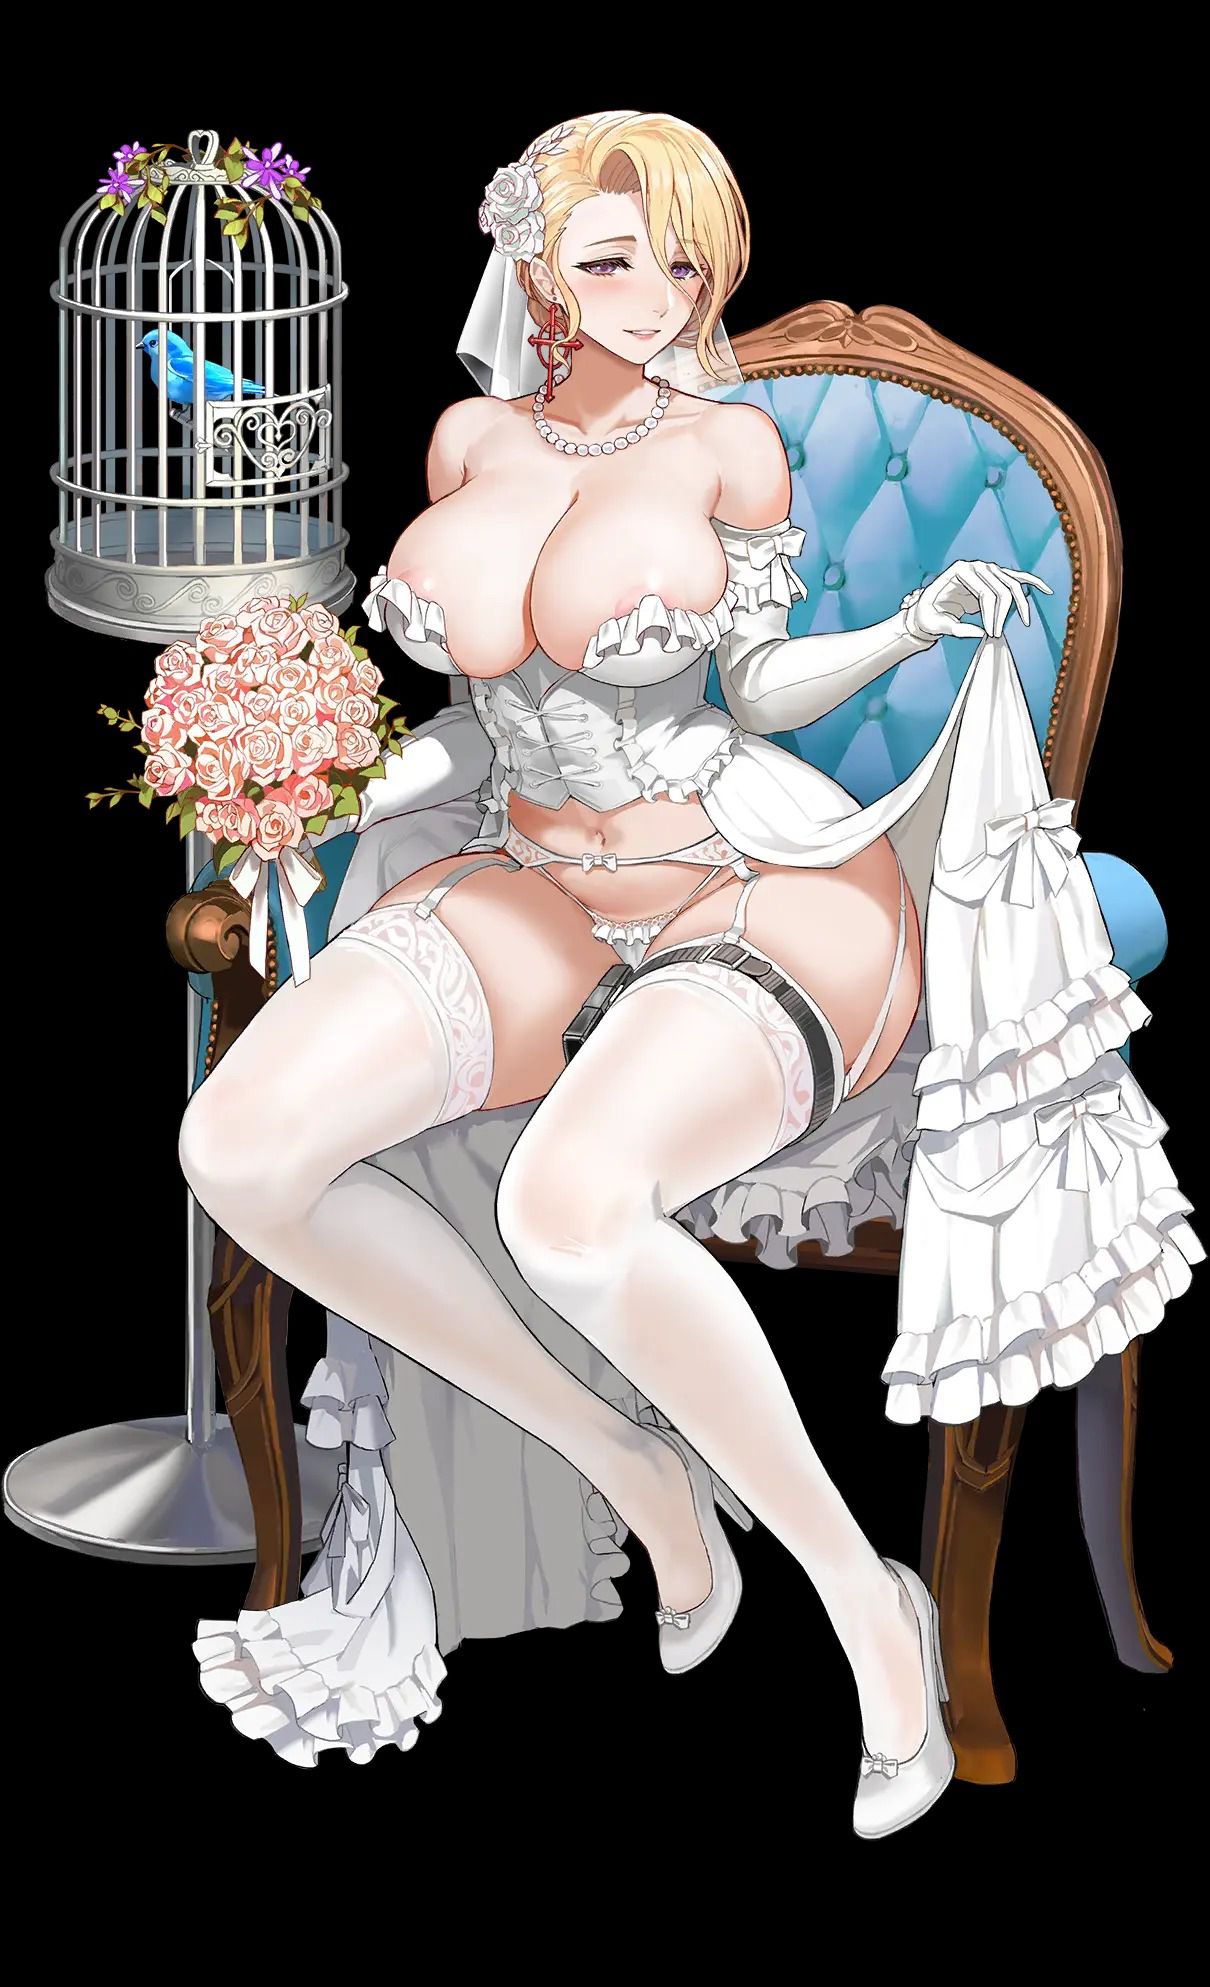 Smartphone game "The costume of the new character is a skim exposure degree last minute! ! Can you see your nipples? 6